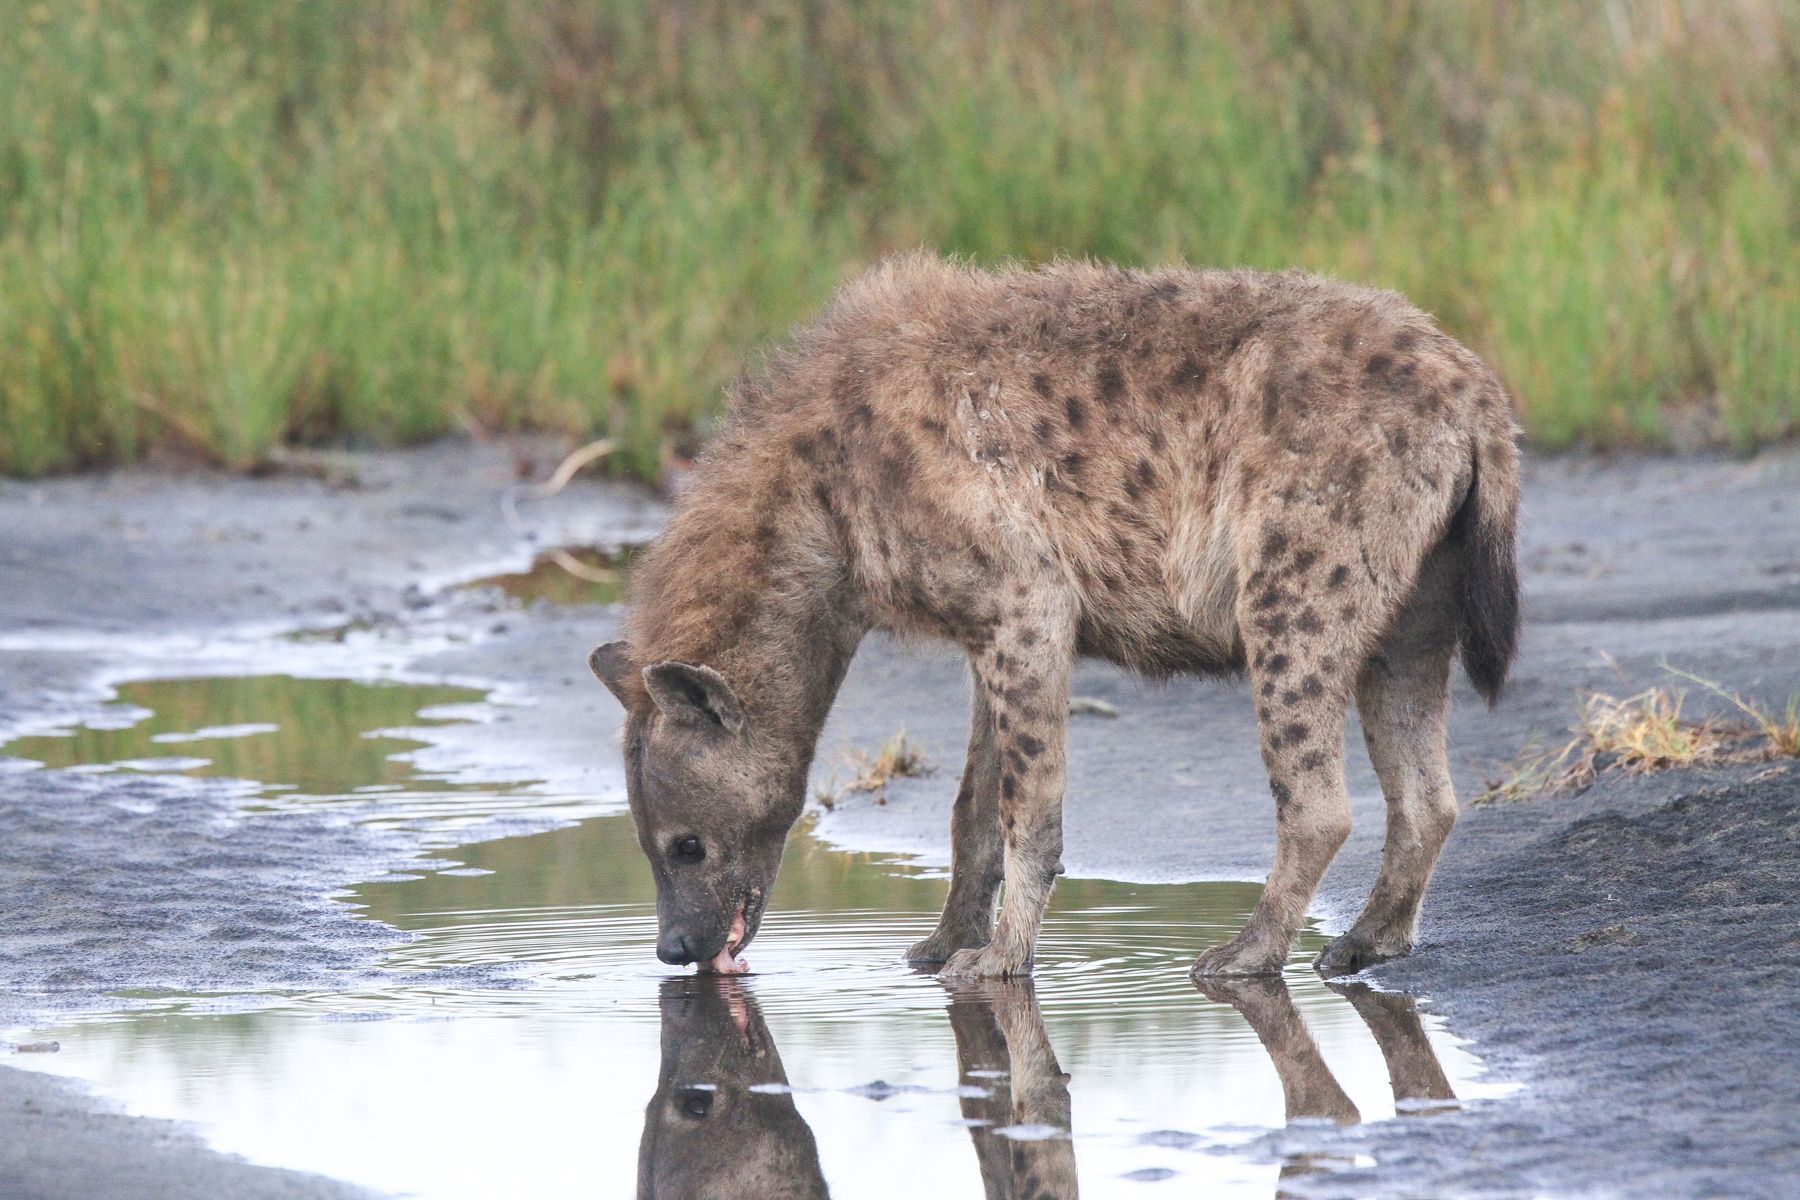 A Spotted Hyaena, a major threat to young Cheetahs, drinks from a pool